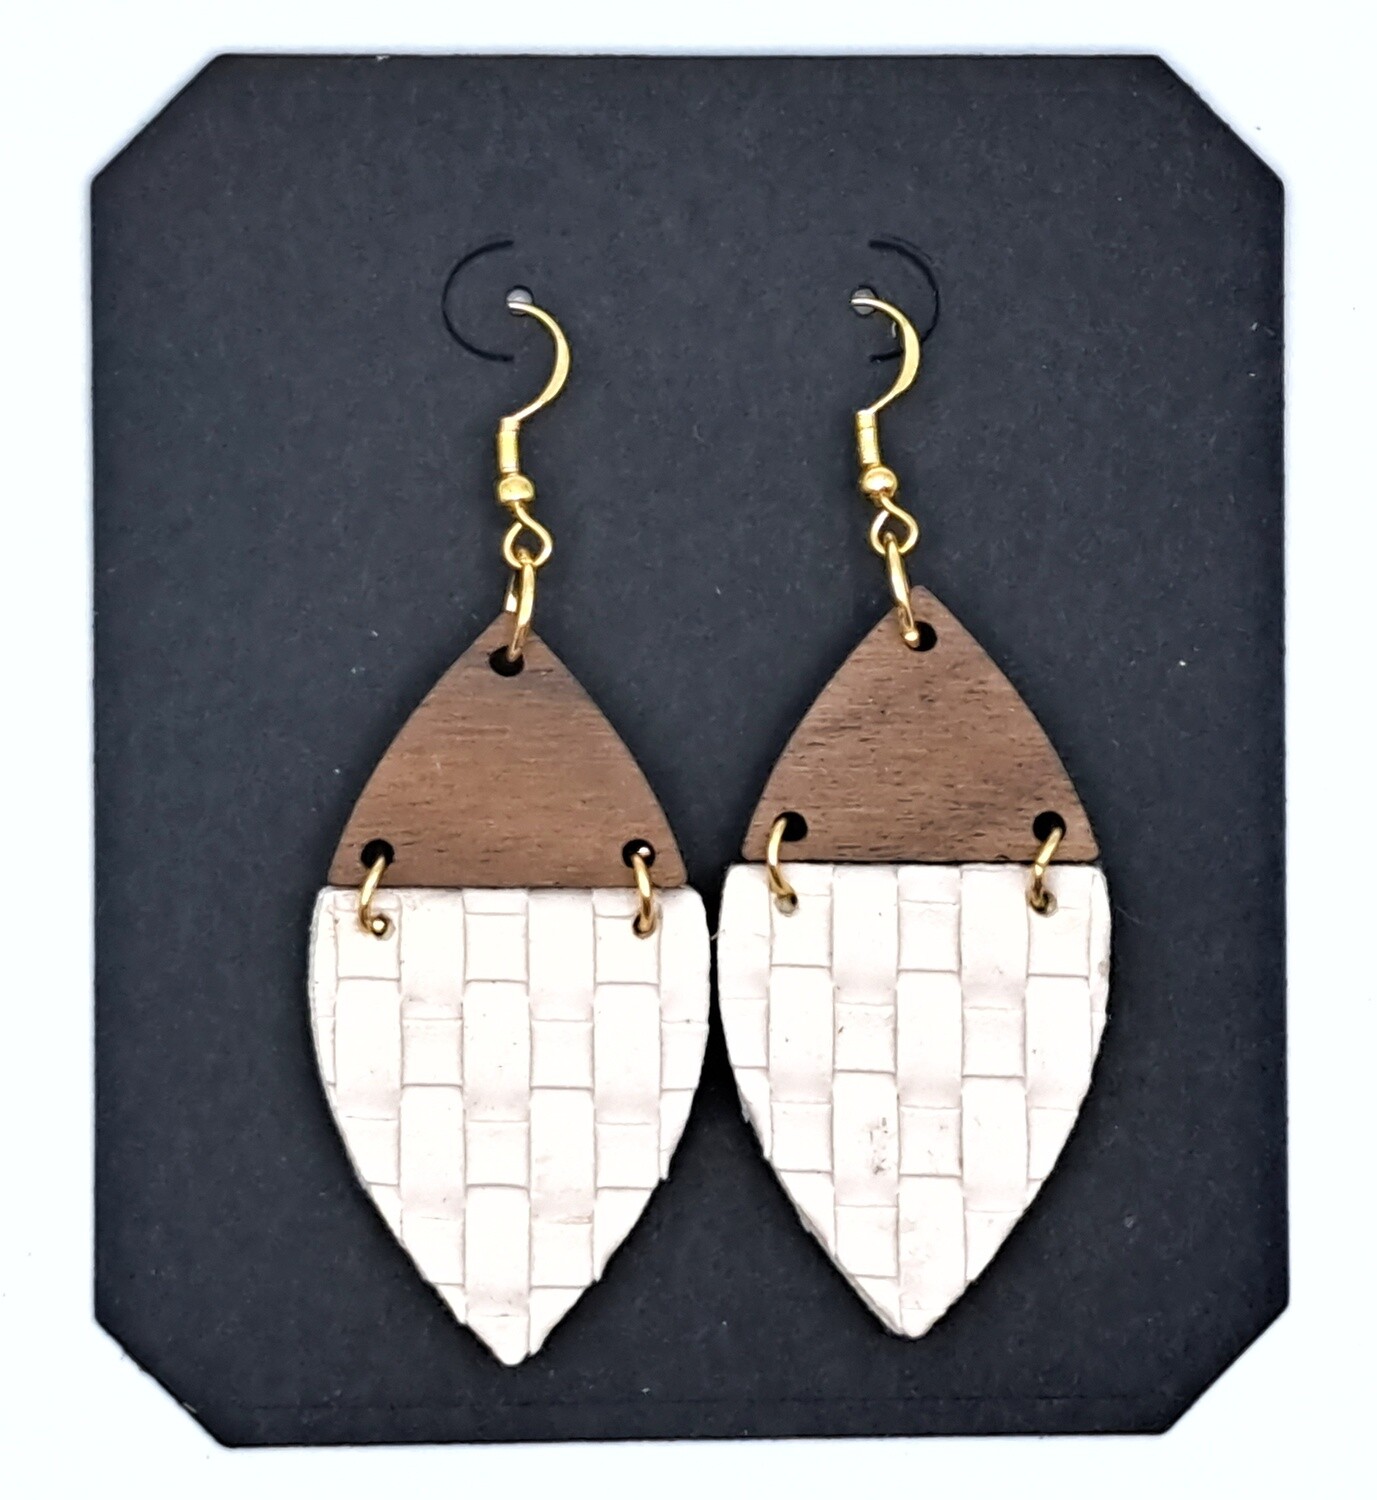 Handmade Woven Faux Leather, Wooden Triangular Shaped Earrings